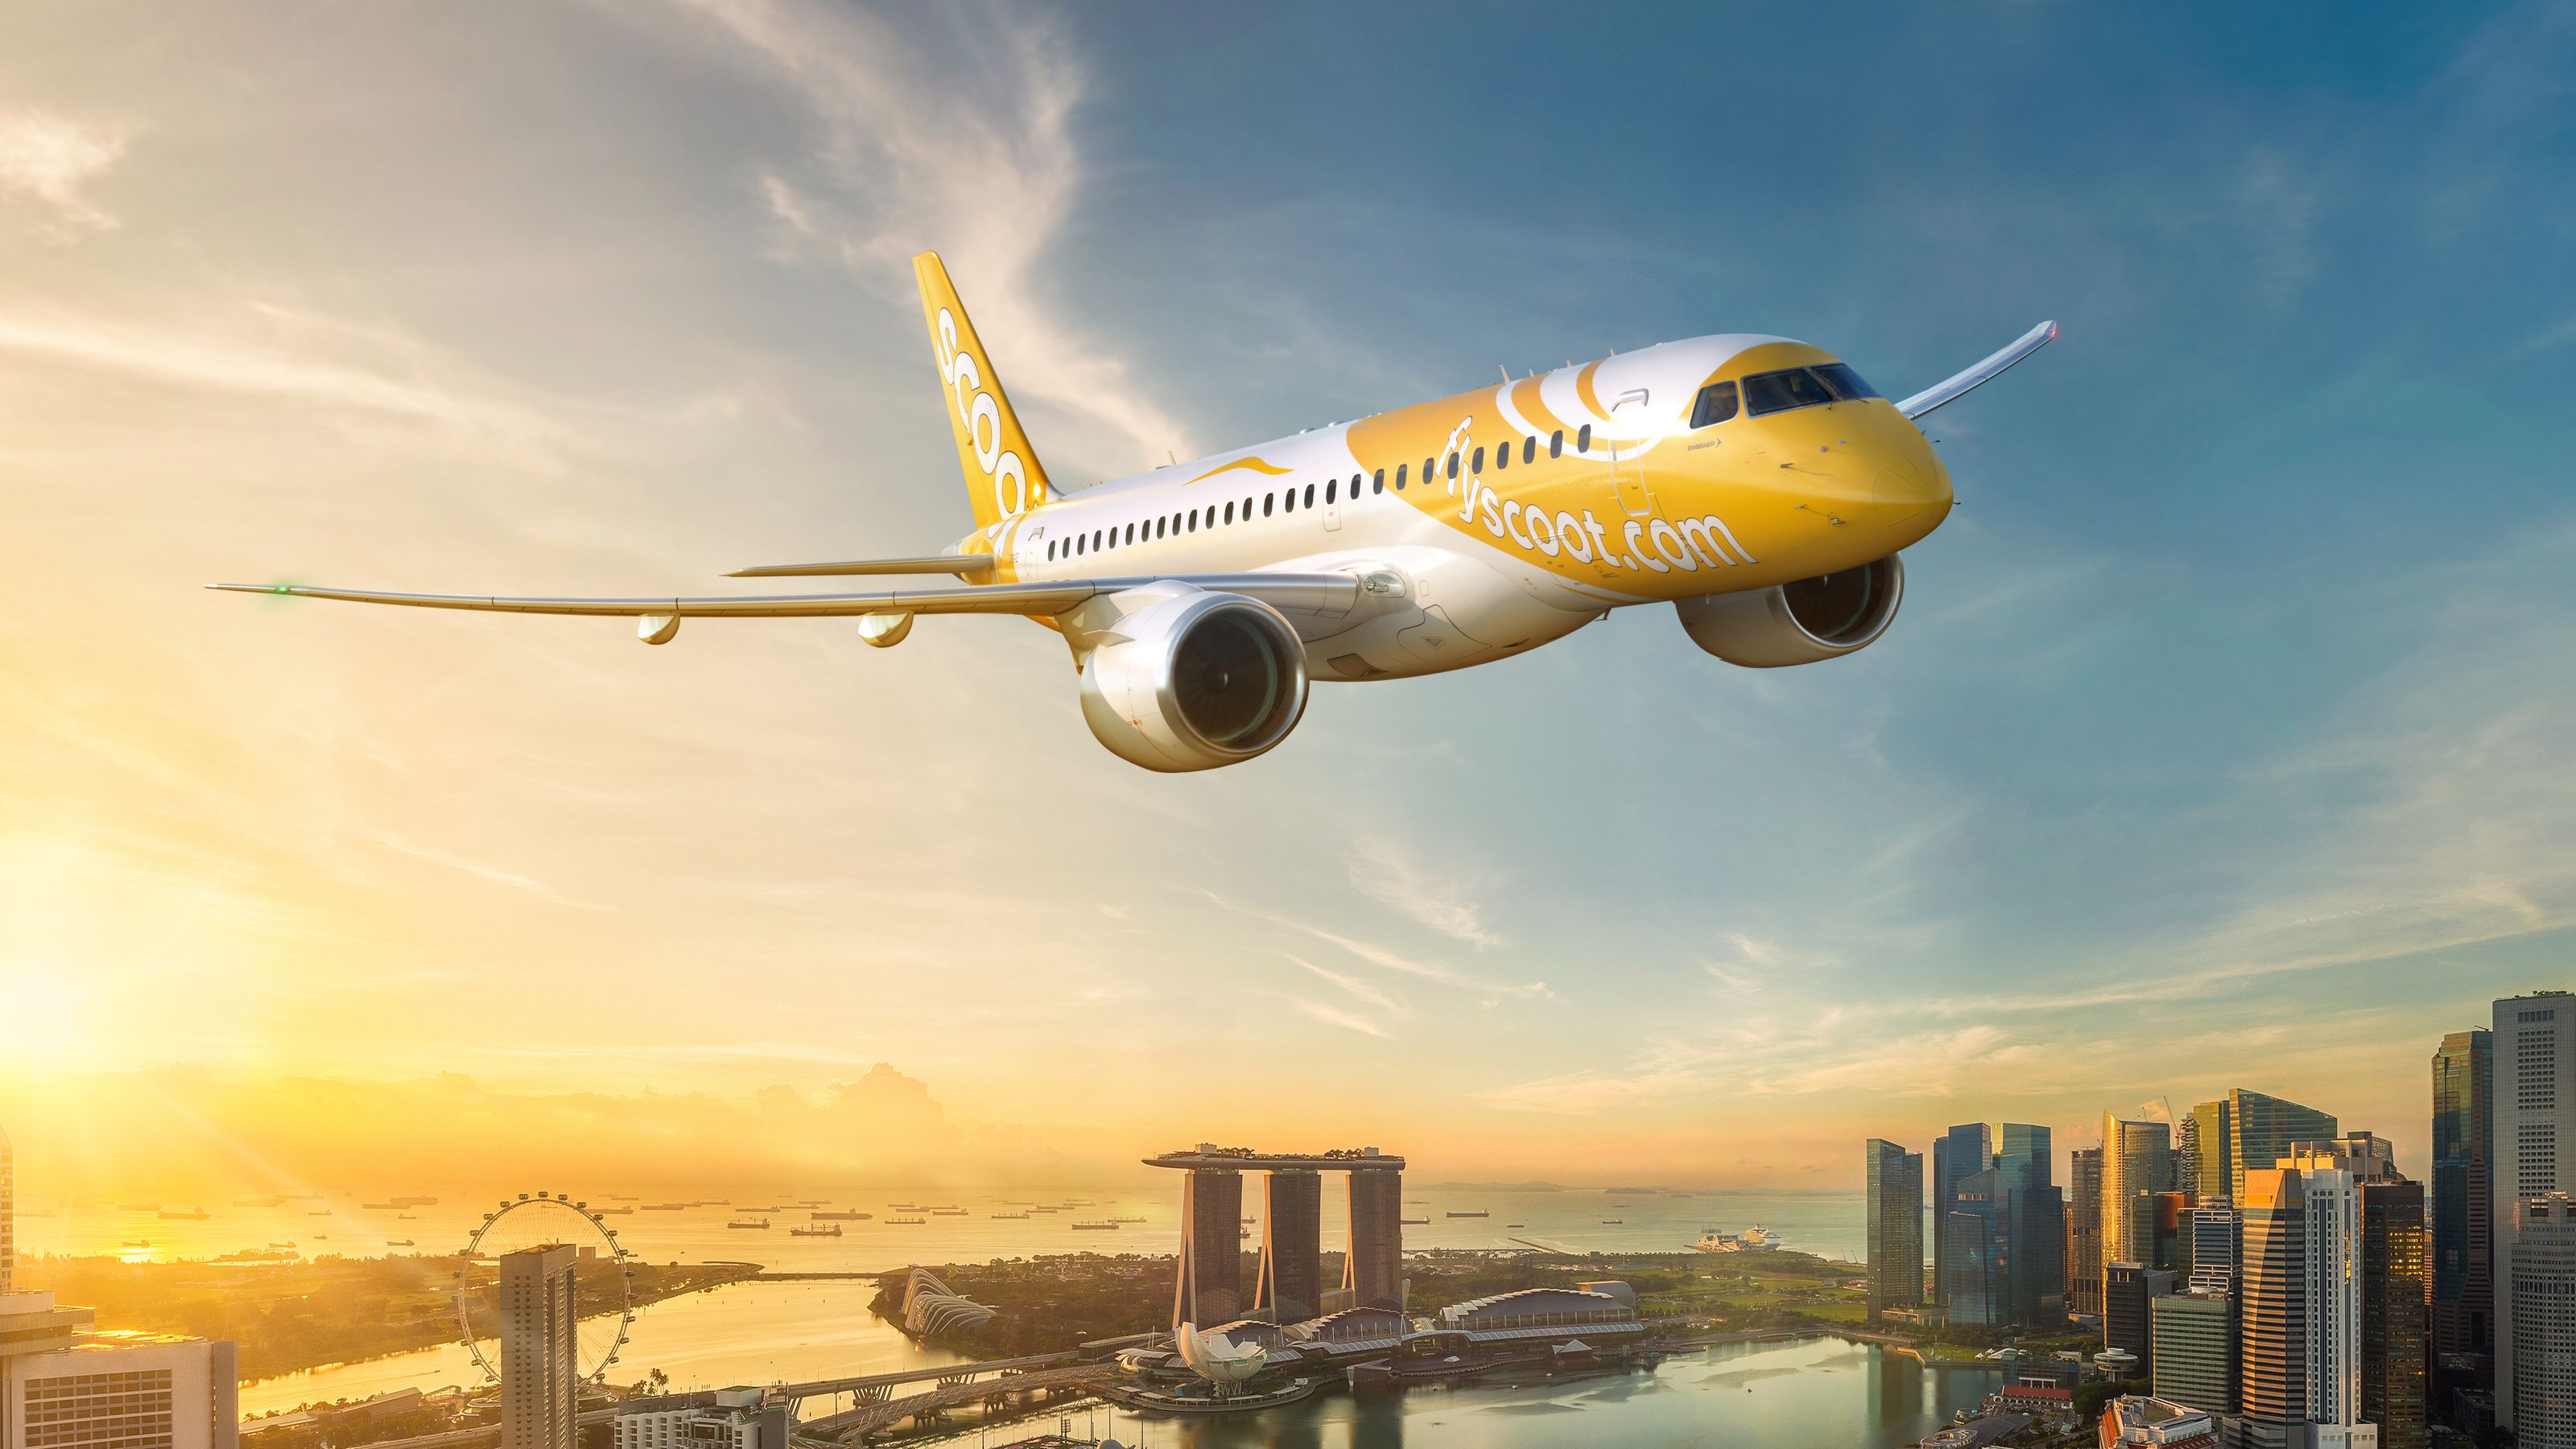 Scoot CEO Says Embraer''s E190-E2 Will Support The Airline''s Growth